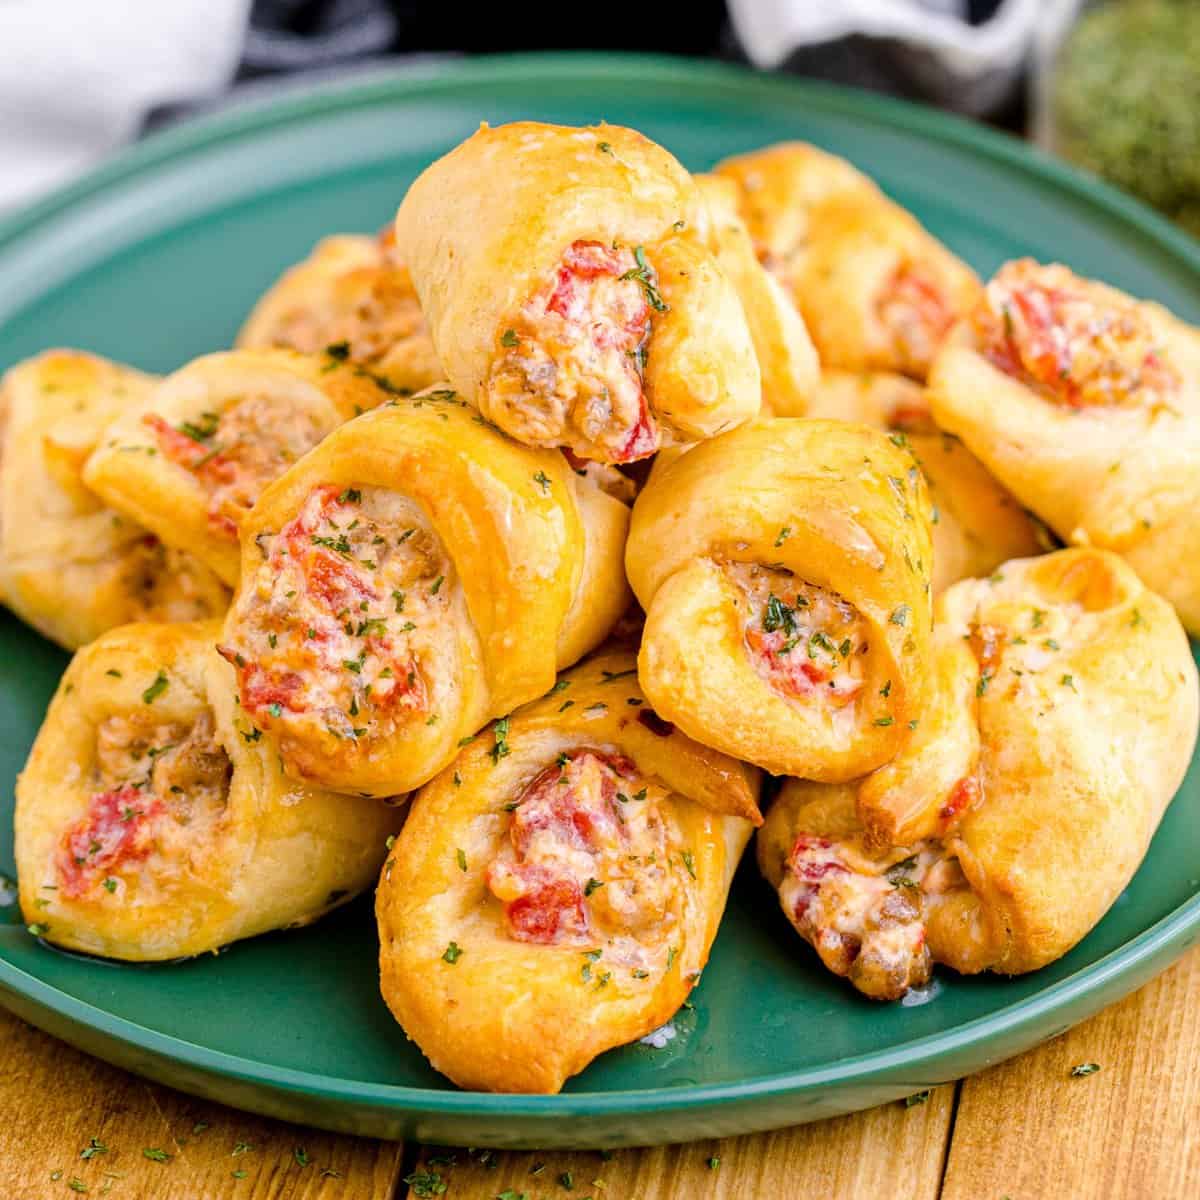 26 Crescent Roll Appetizers